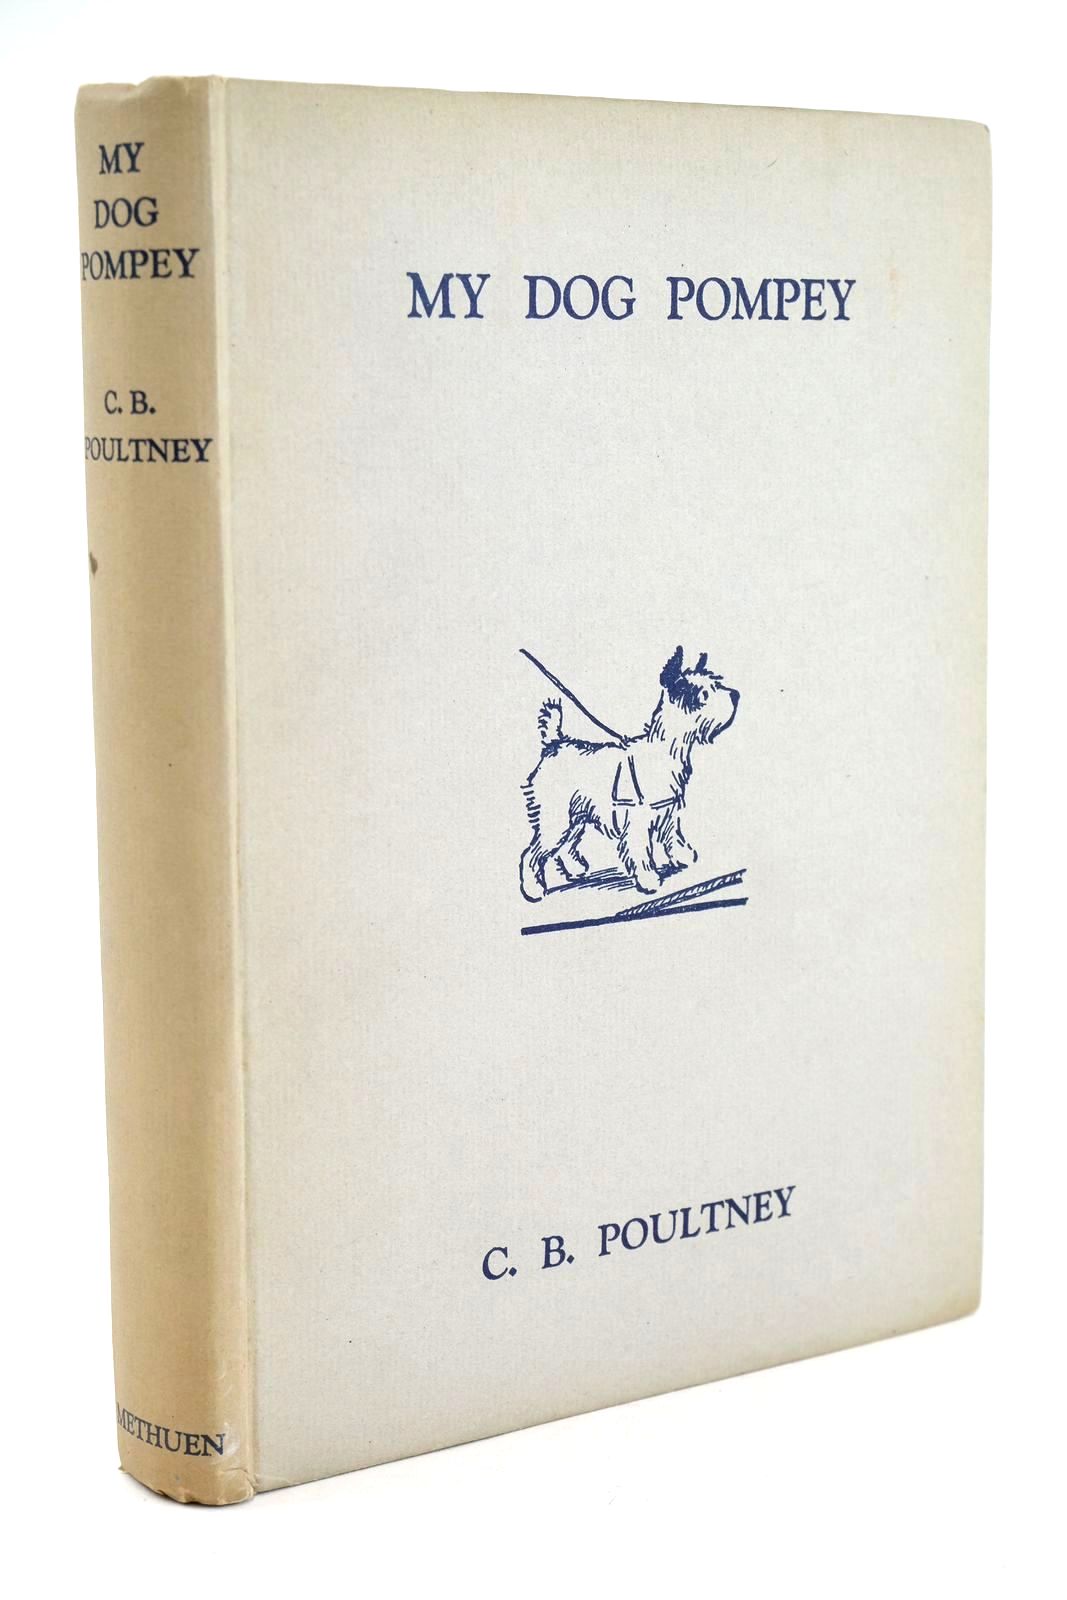 Photo of MY DOG POMPEY written by Poultney, C.B. illustrated by Poultney, C.B. published by Methuen & Co. Ltd. (STOCK CODE: 1324614)  for sale by Stella & Rose's Books